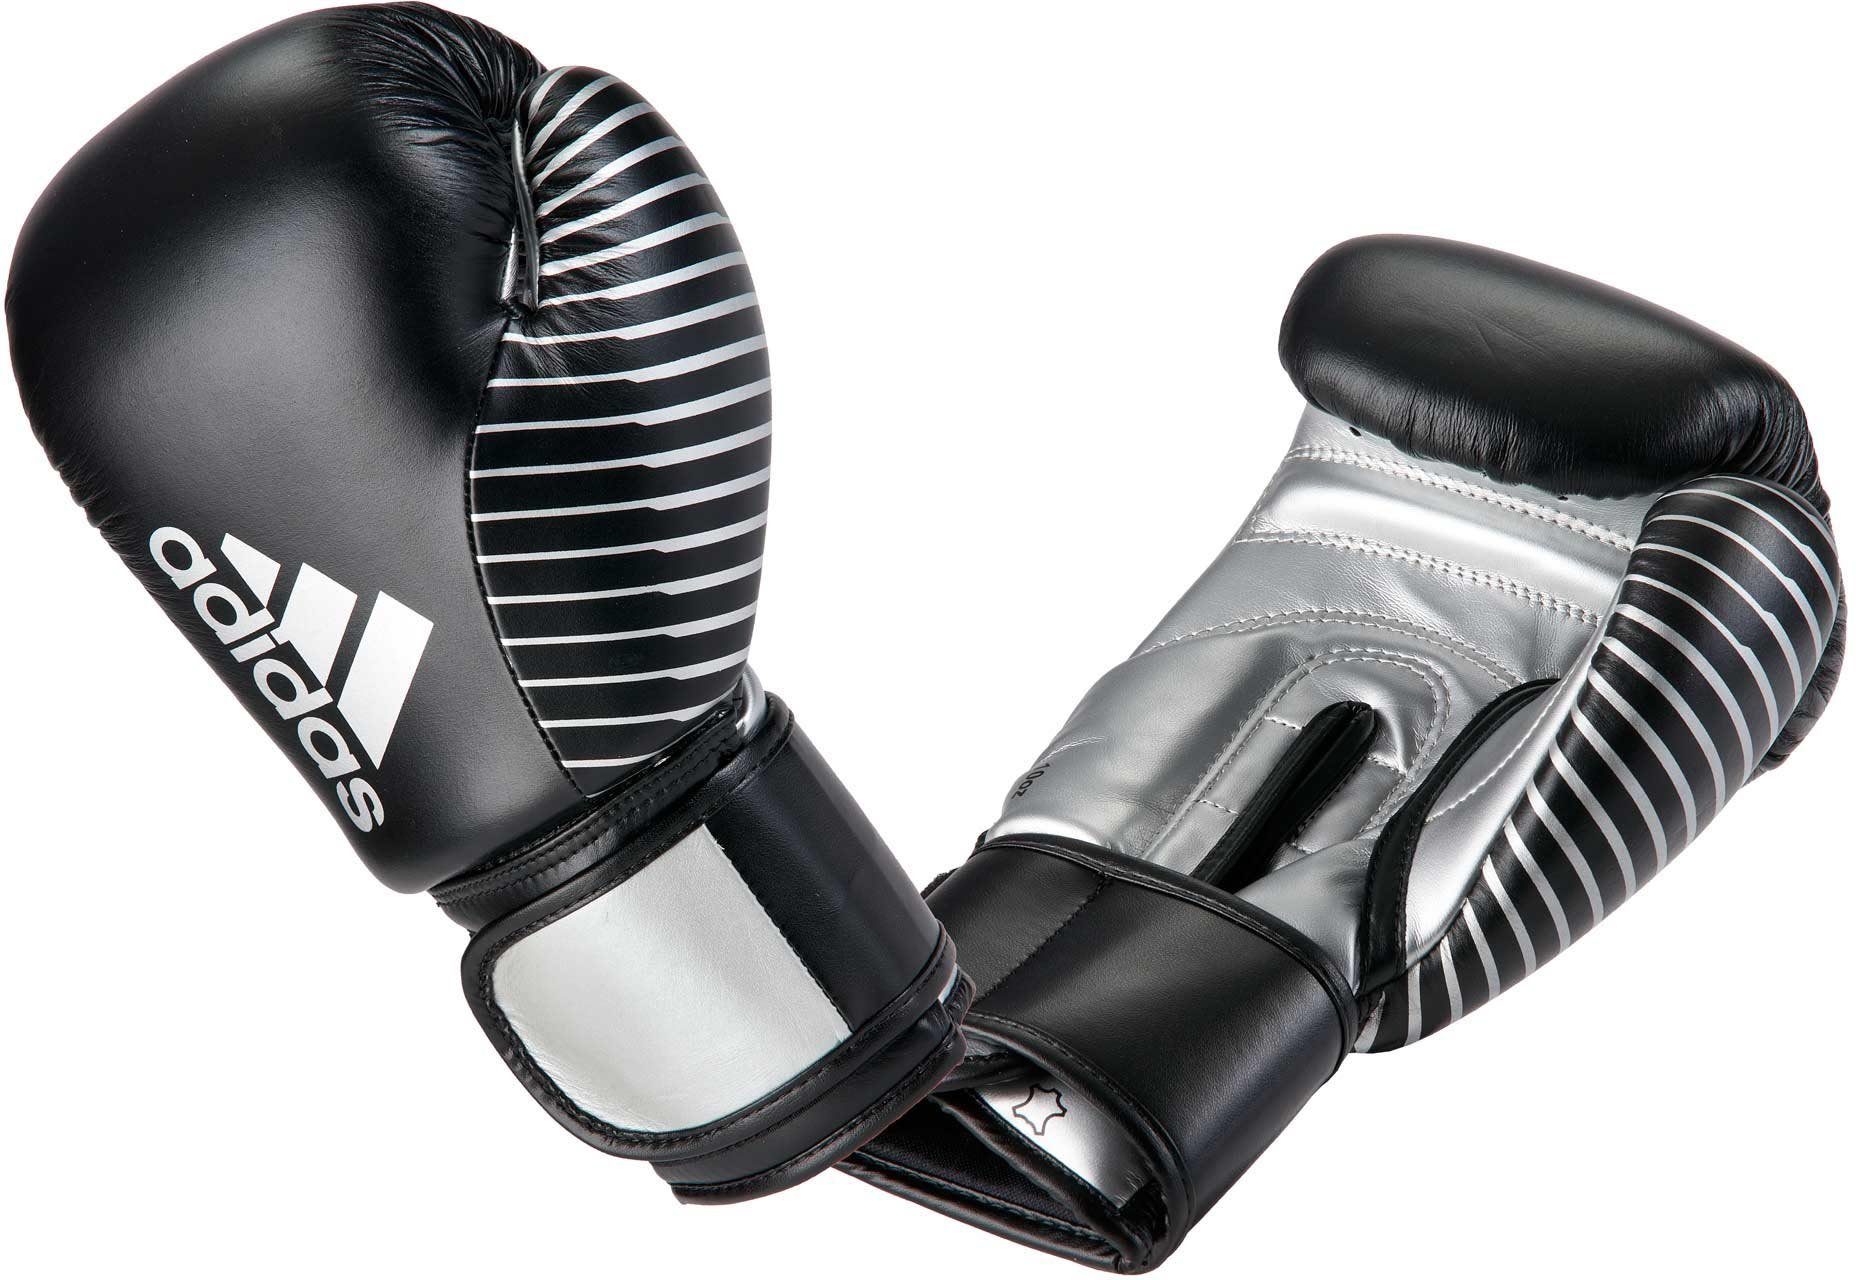 adidas black/silver Competition Handschuh Performance Boxhandschuhe